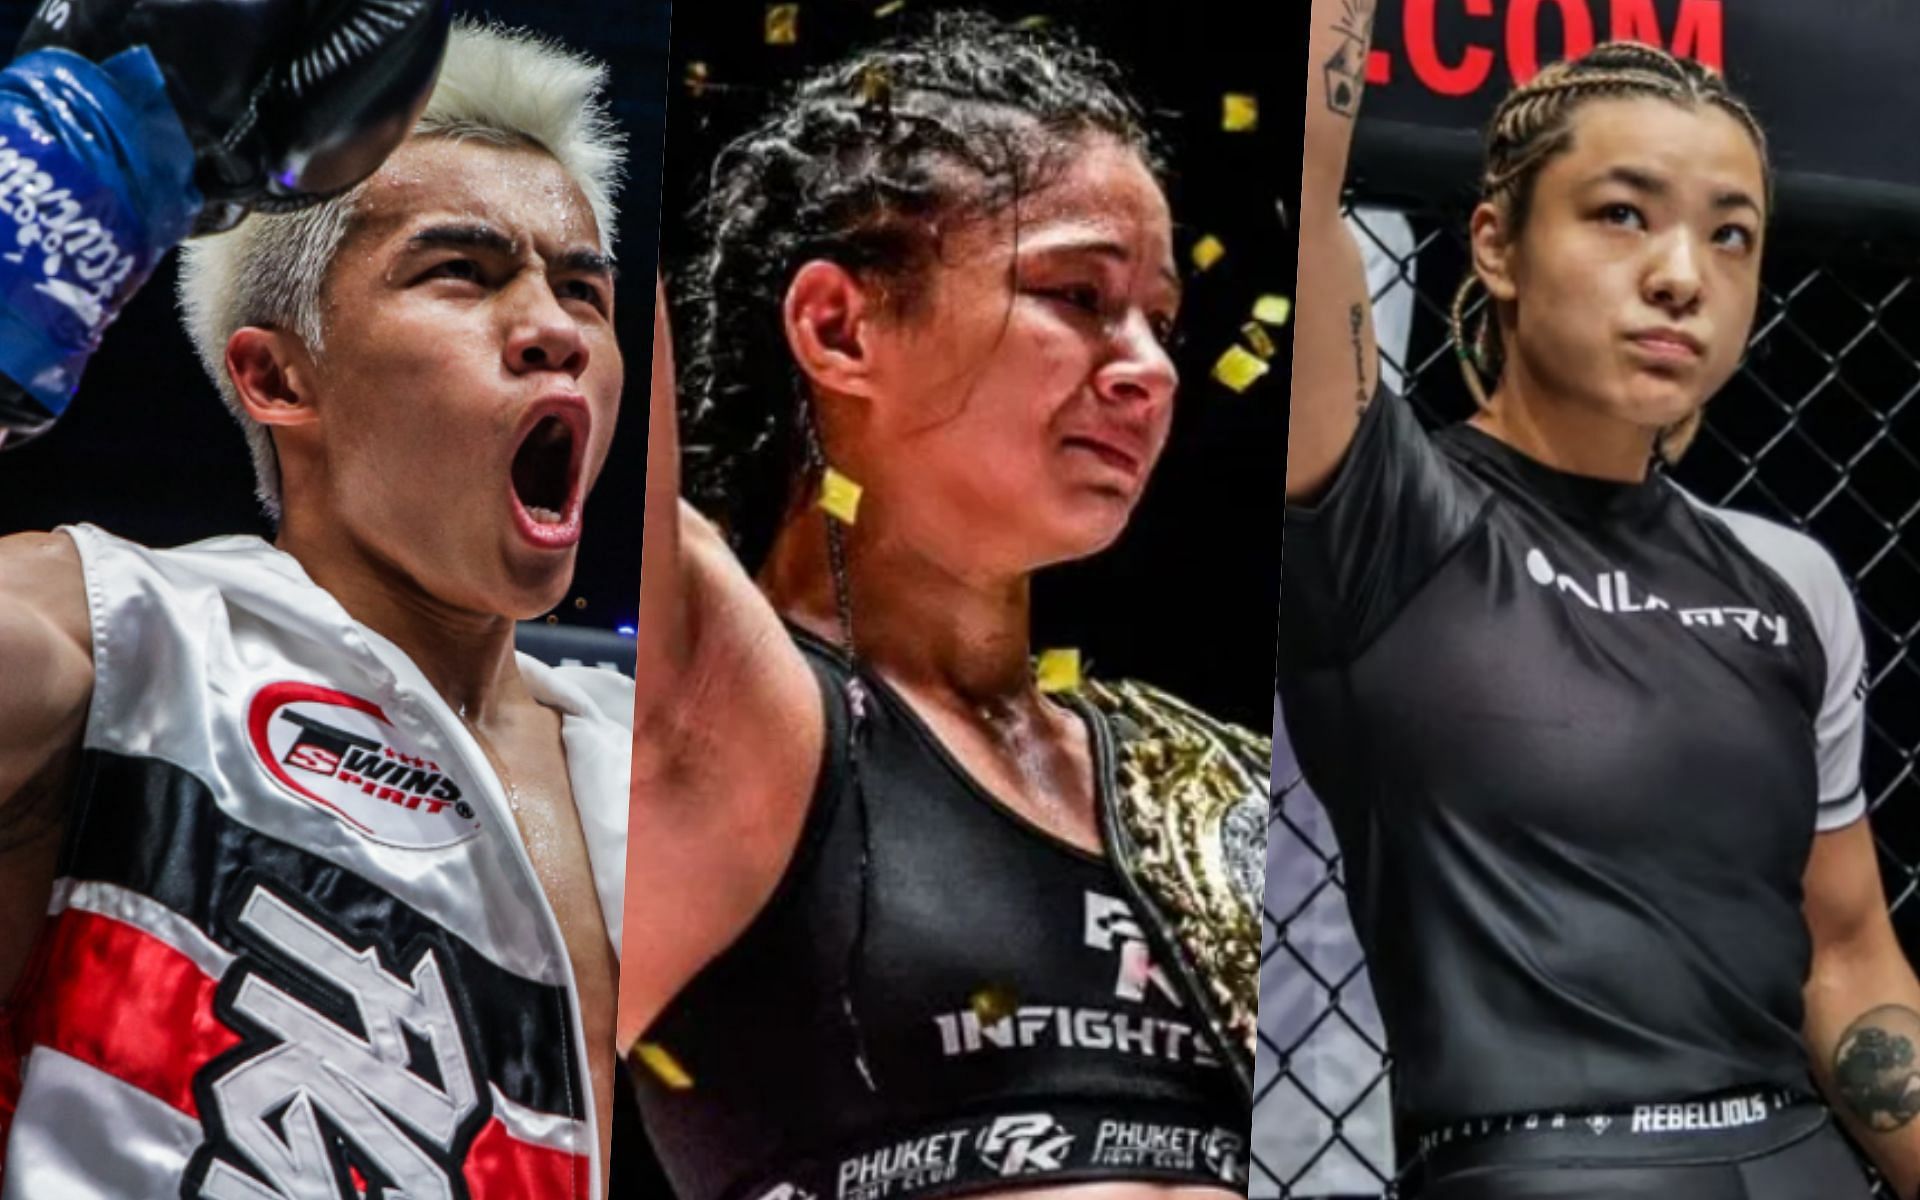 From left to right: Zhang Peimian, Allycia Hellen Rodrigues, and Itsuki Hirata. | Photo by ONE Championship